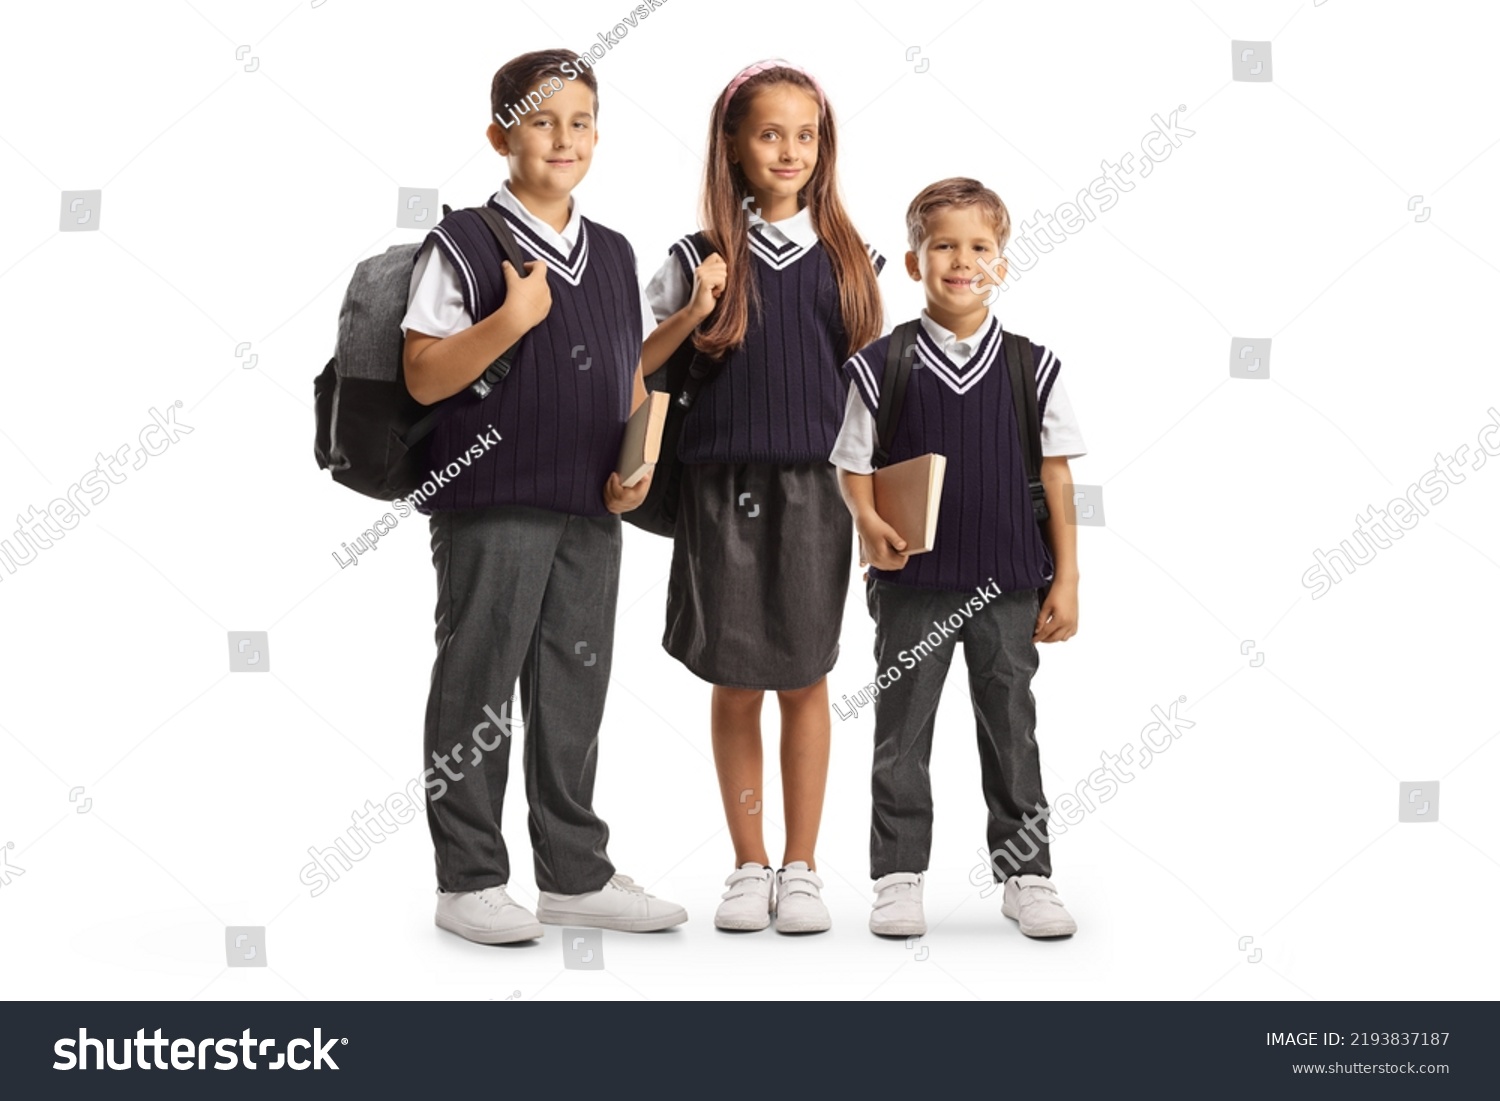 Two boys and one girl in school uniforms carrying backpacks isolated on white background #2193837187